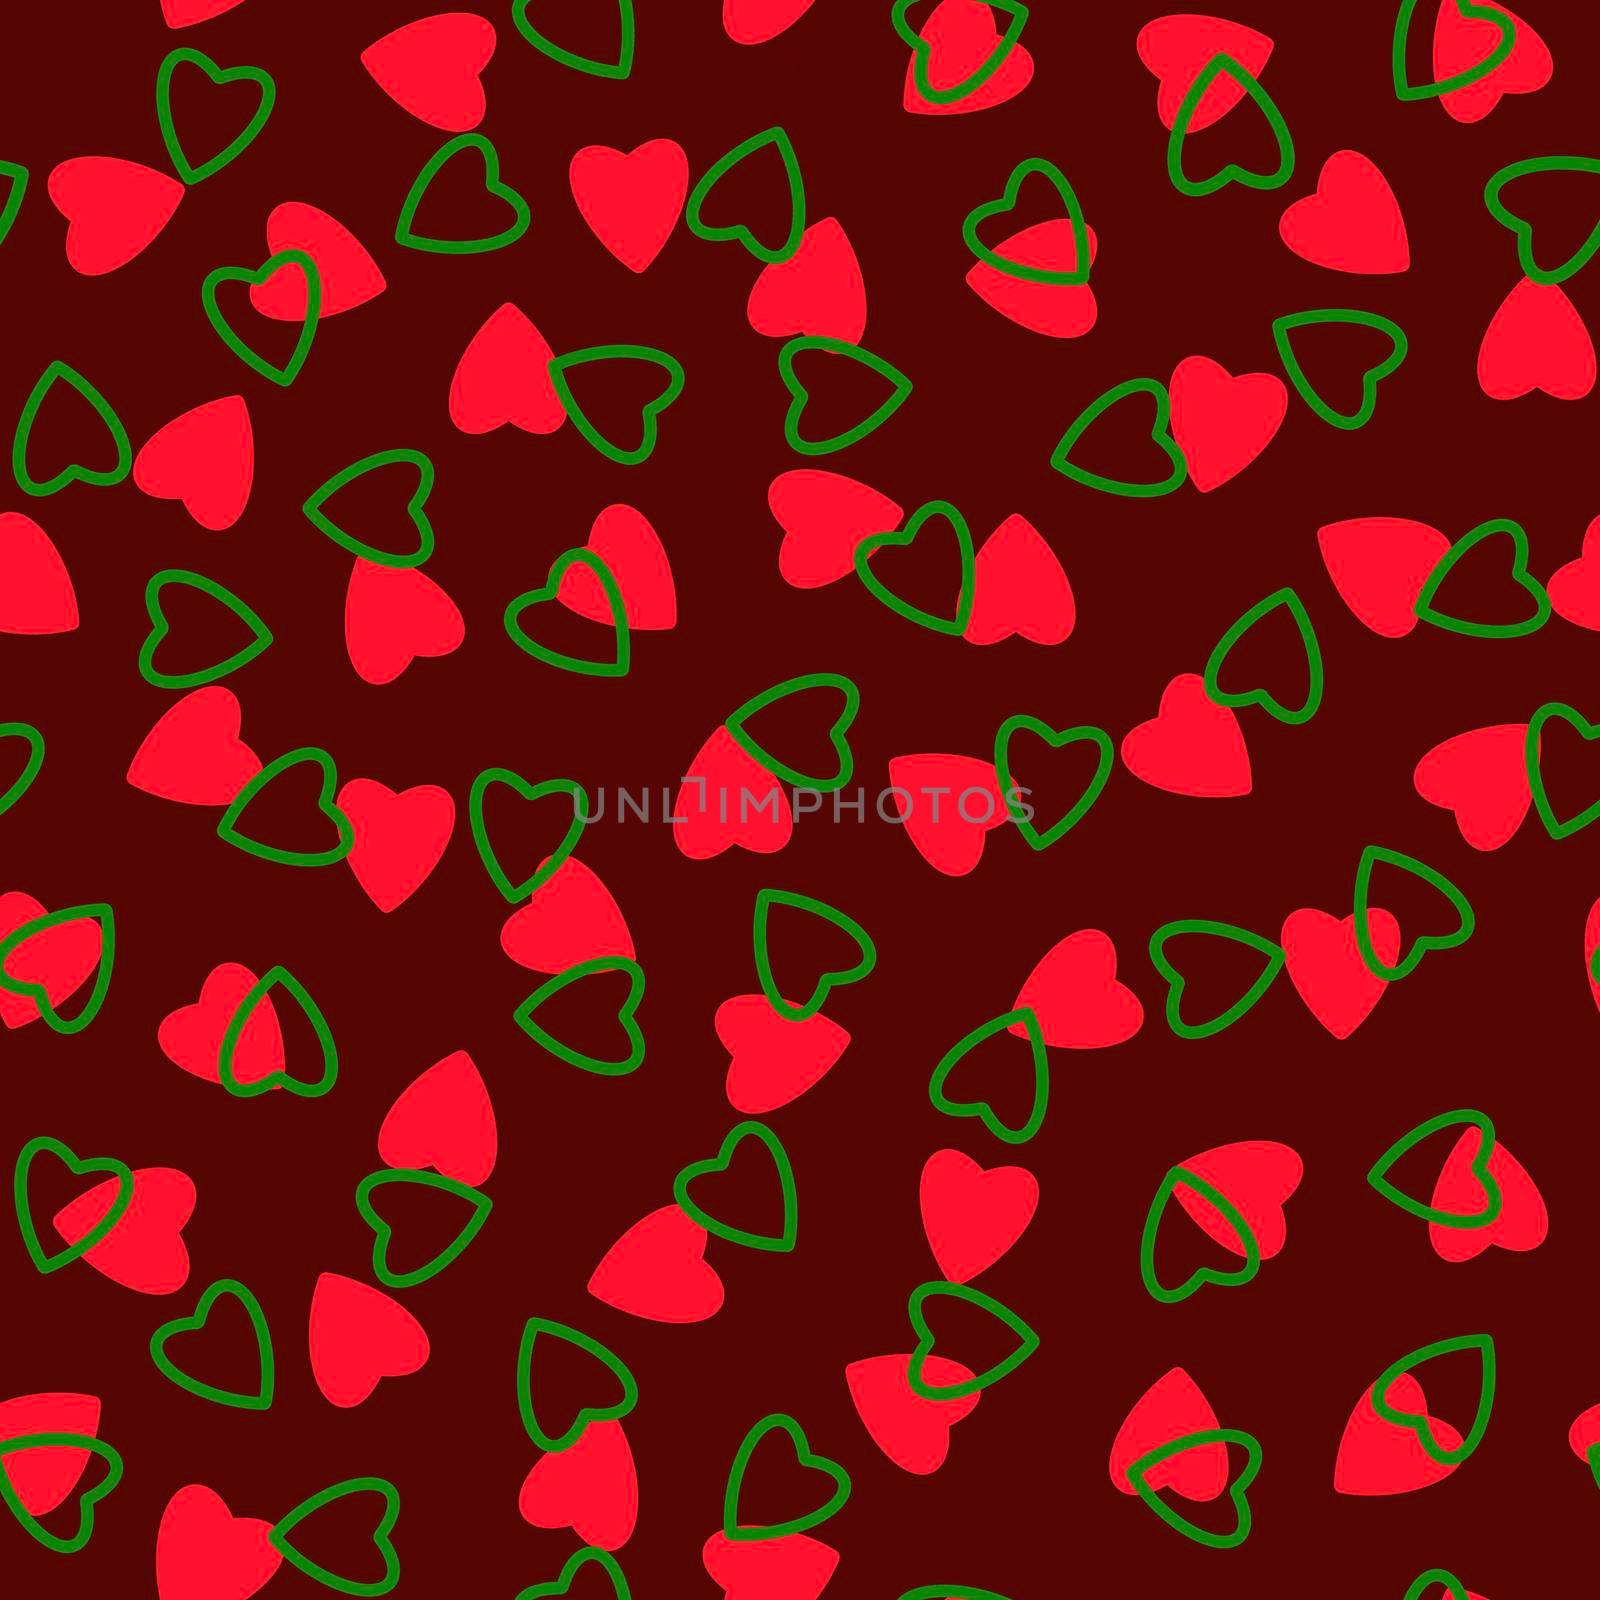 Simple hearts seamless pattern,endless chaotic texture made tiny heart silhouettes.Valentines,mothers day background.Red,green,burgundy.Great for Easter,wedding,scrapbook,gift wrapping paper,textiles